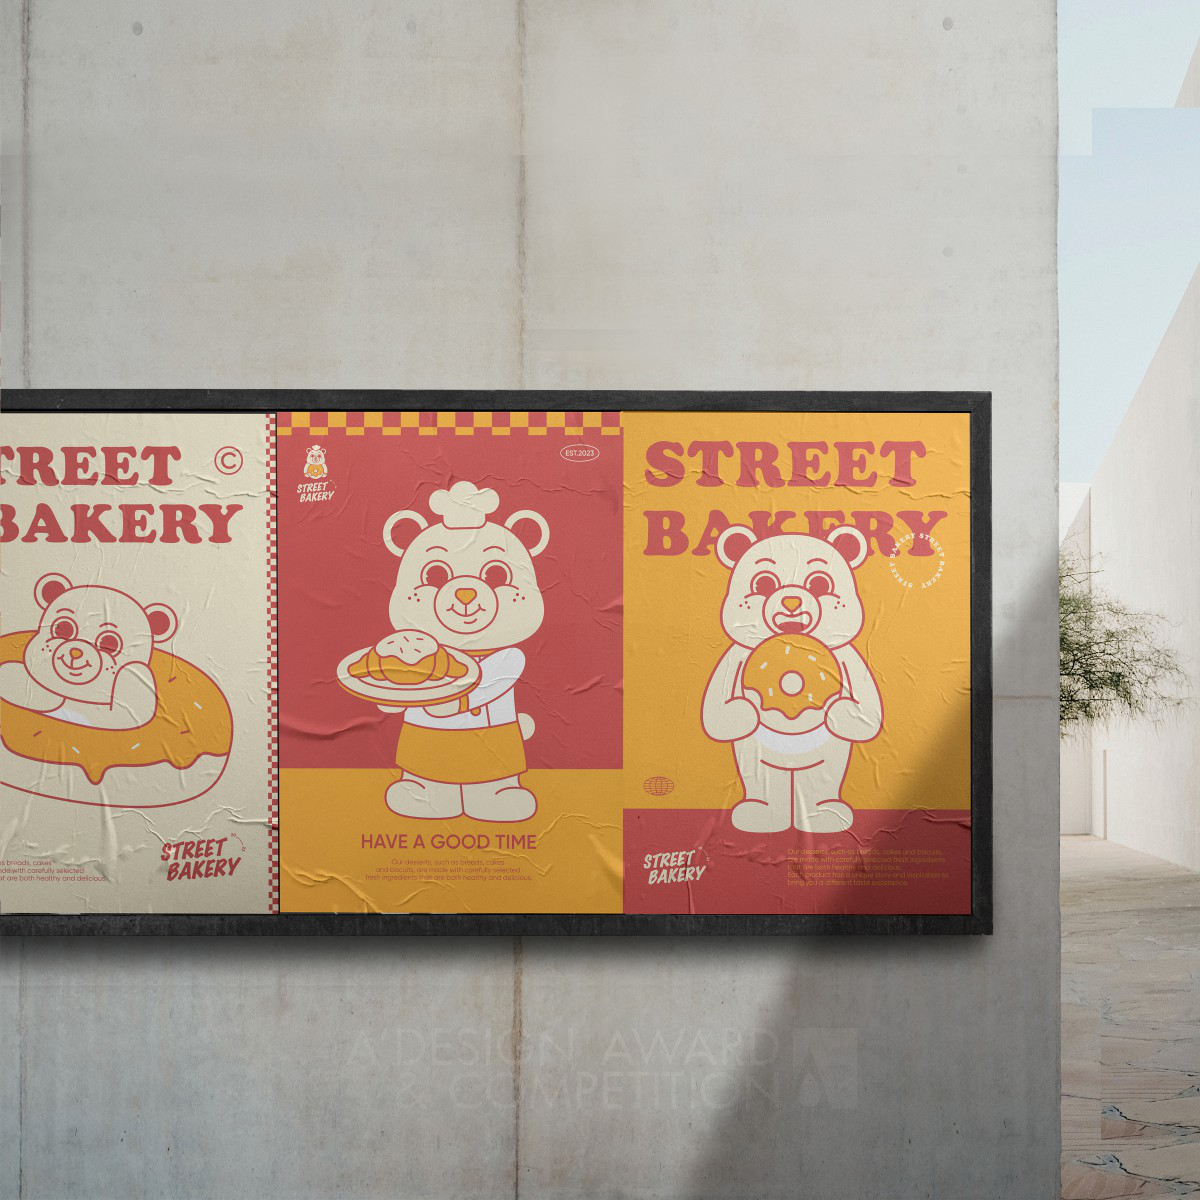 Sinong Ding wins Iron at the prestigious A' Graphics, Illustration and Visual Communication Design Award with Street Bakery Brand Identity.